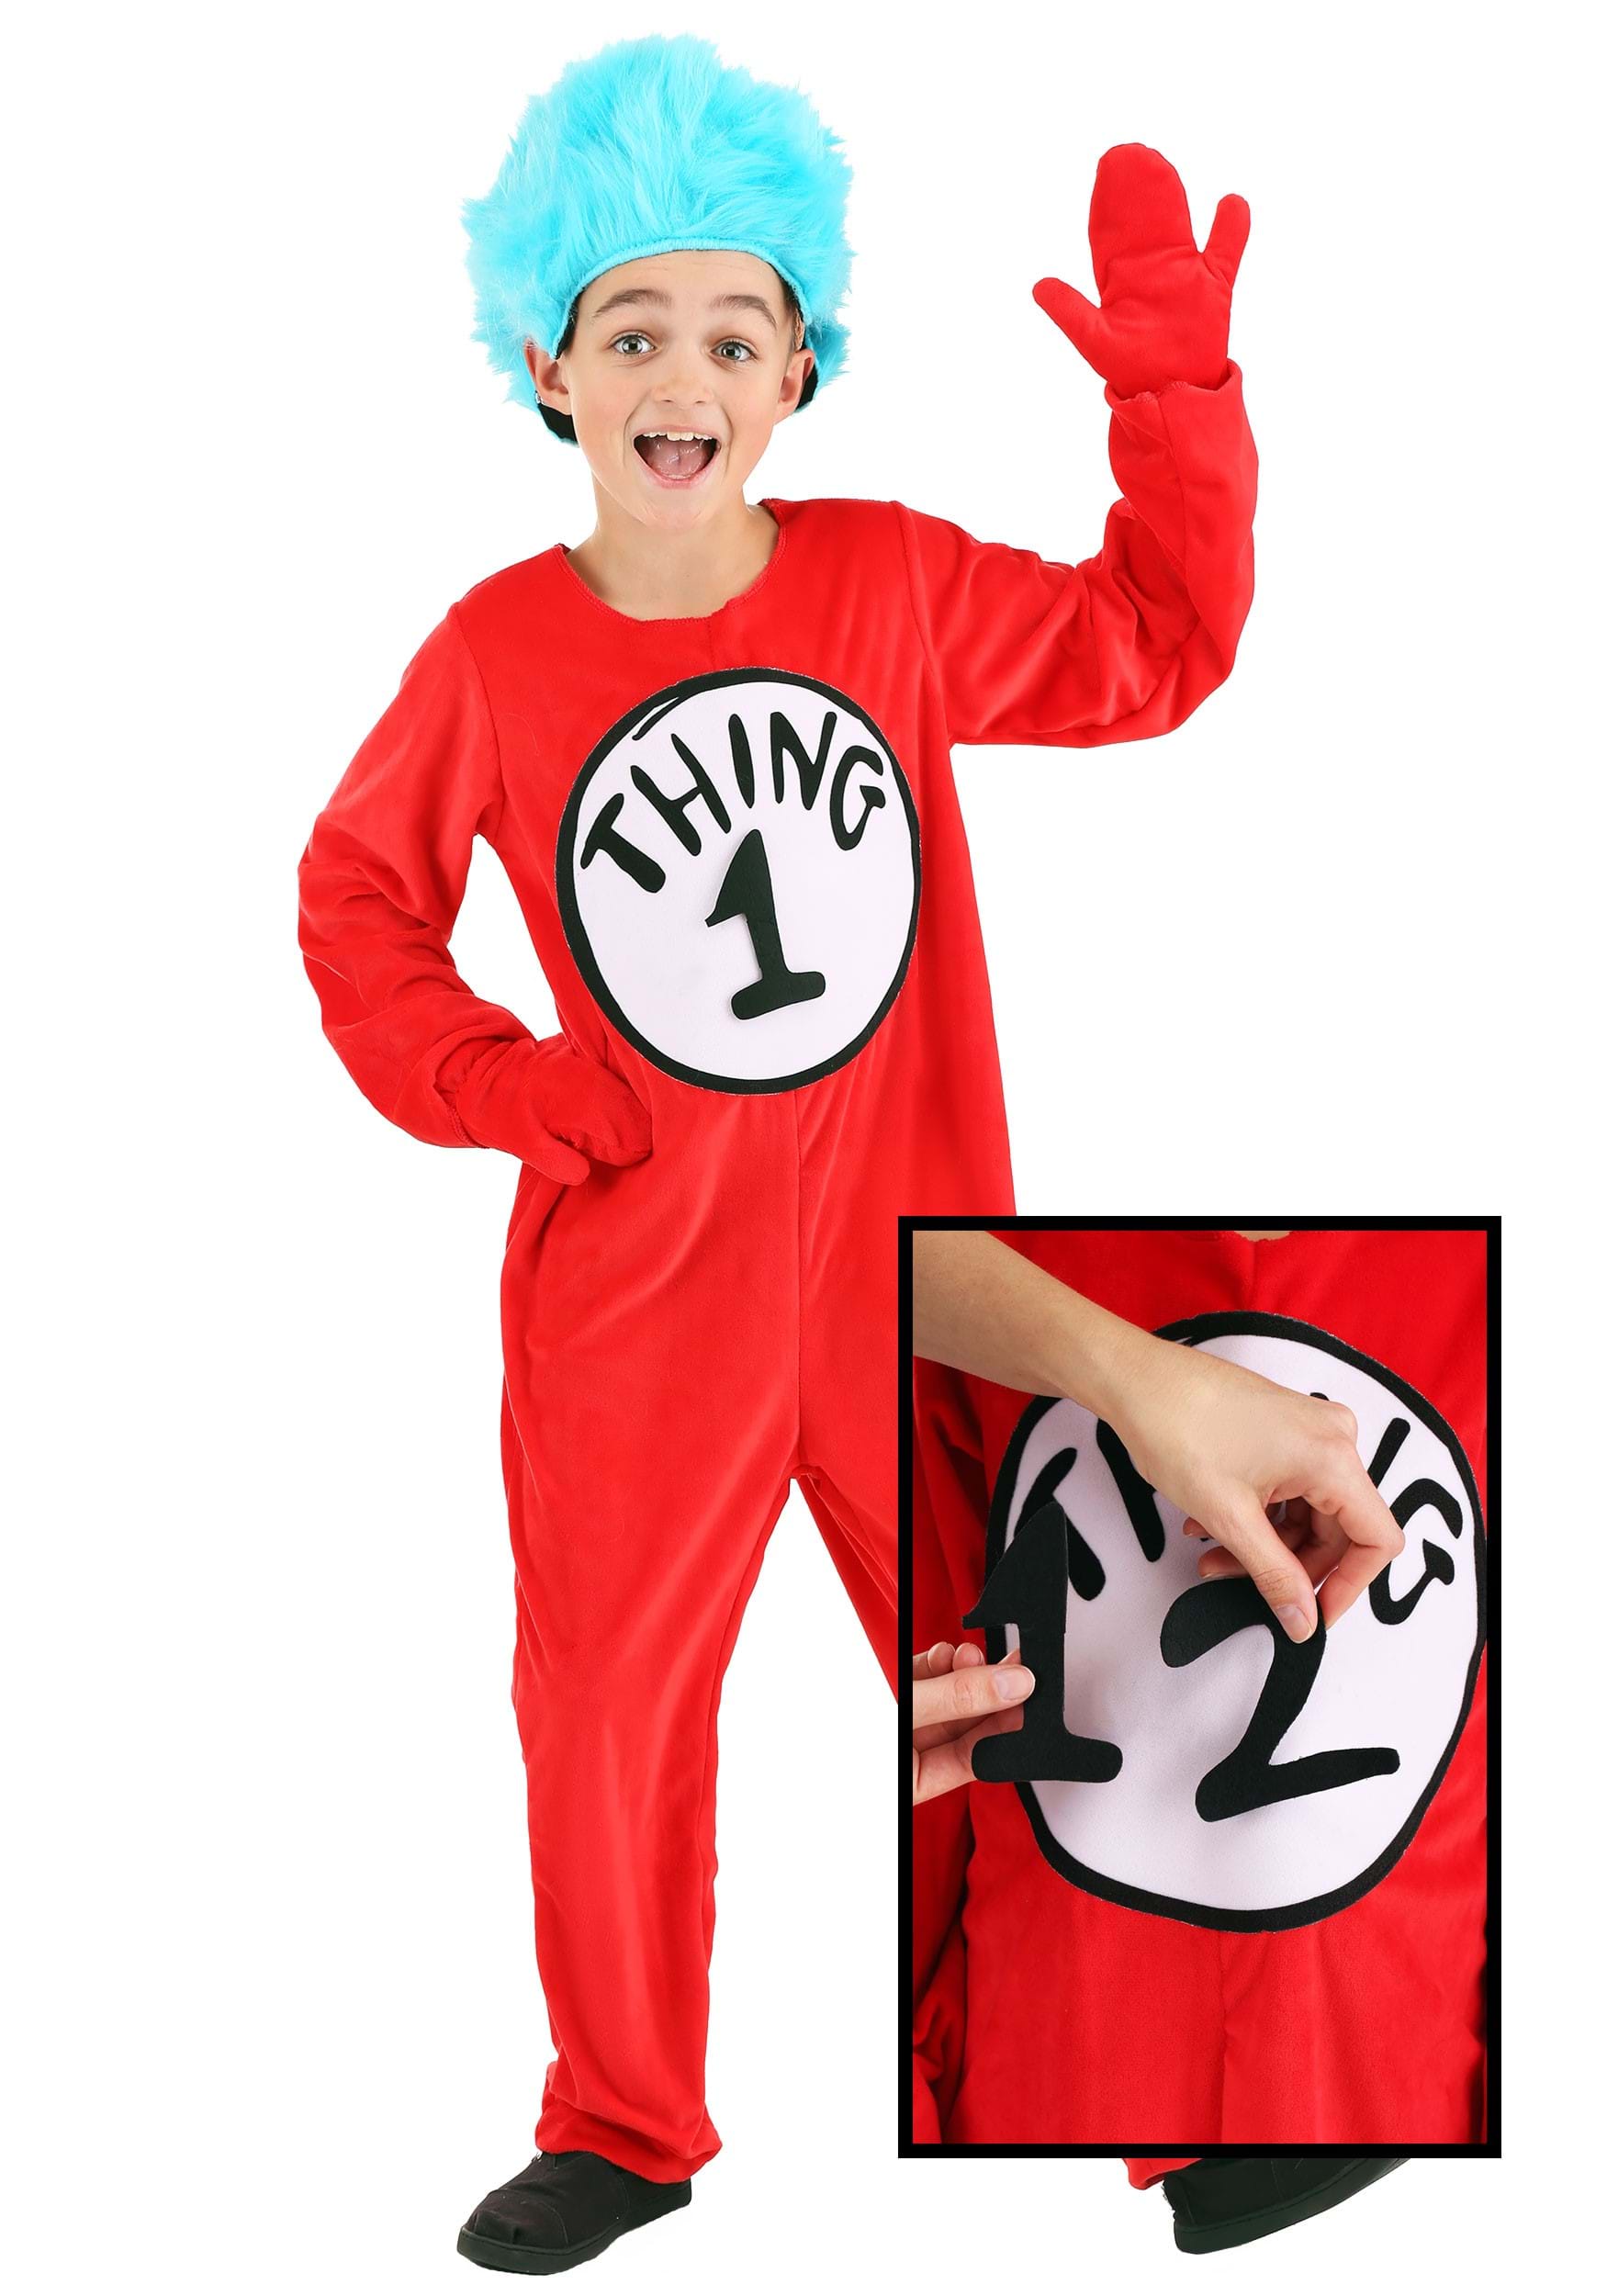 Thing 1&2 Deluxe Child Costume